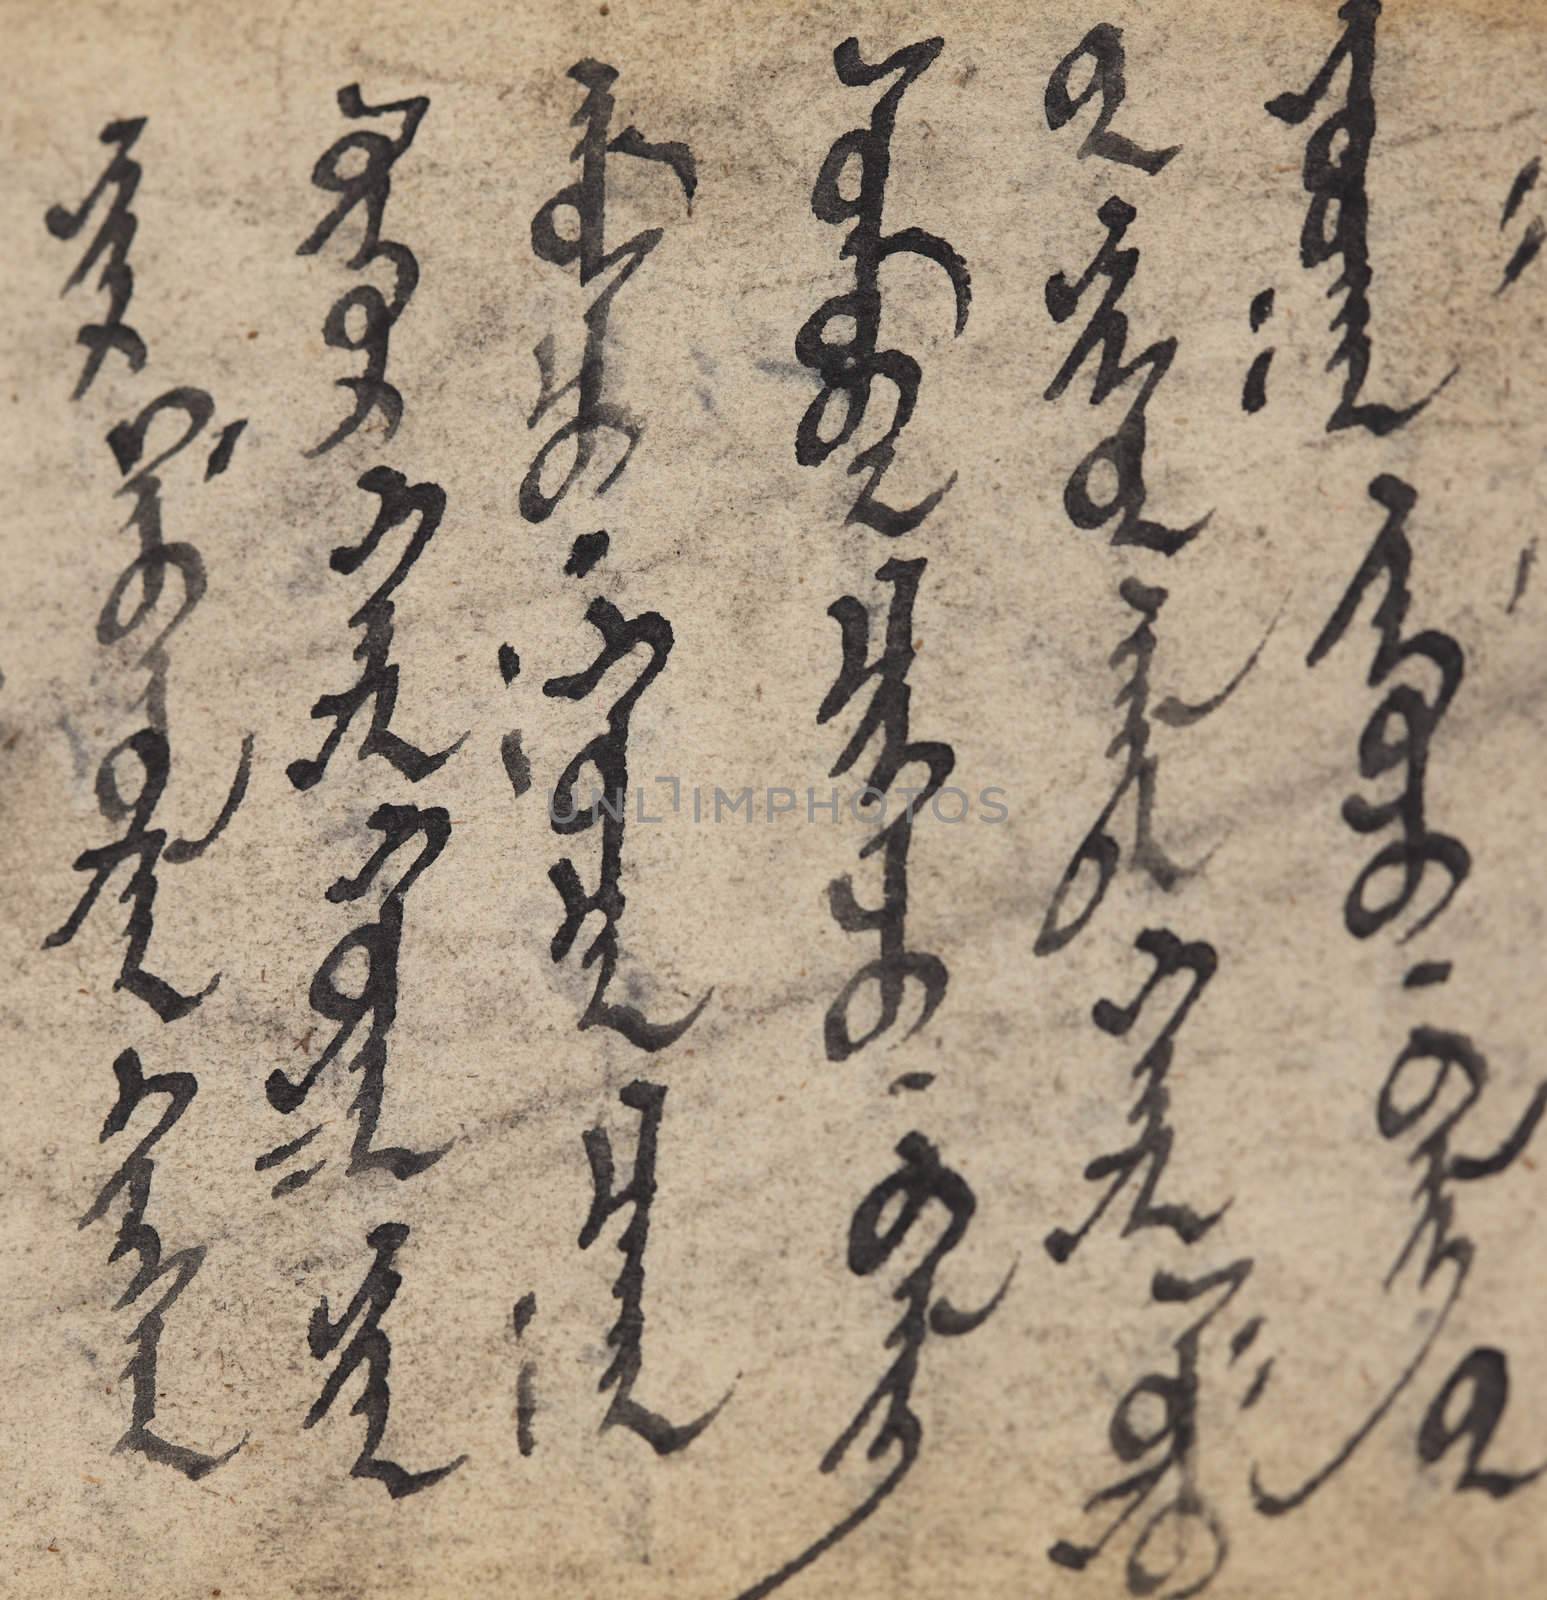 Closeup of mongolian script circa 18-19th century.  Vertical script is read top to bottom, left to right.